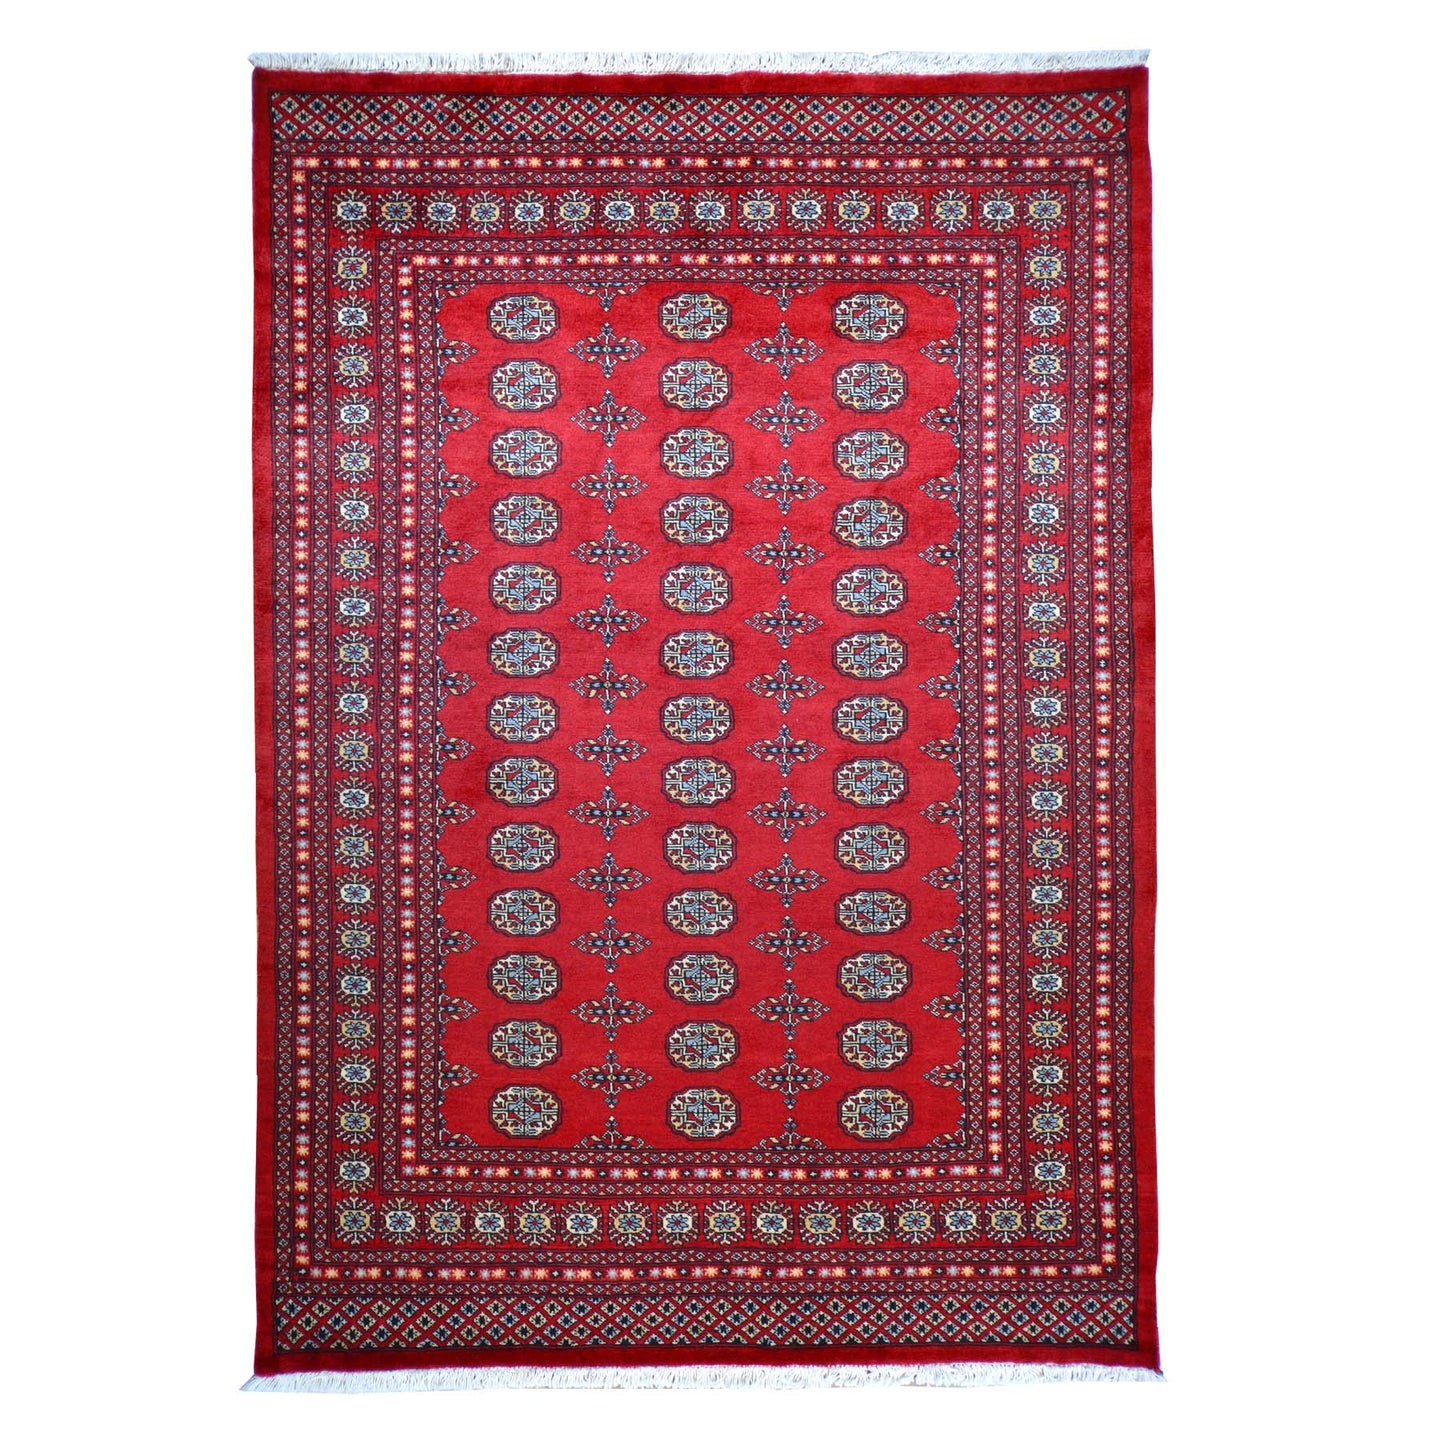 Oriental rugs, hand-knotted carpets, sustainable rugs, classic world oriental rugs, handmade, United States, interior design,  Brral-3963